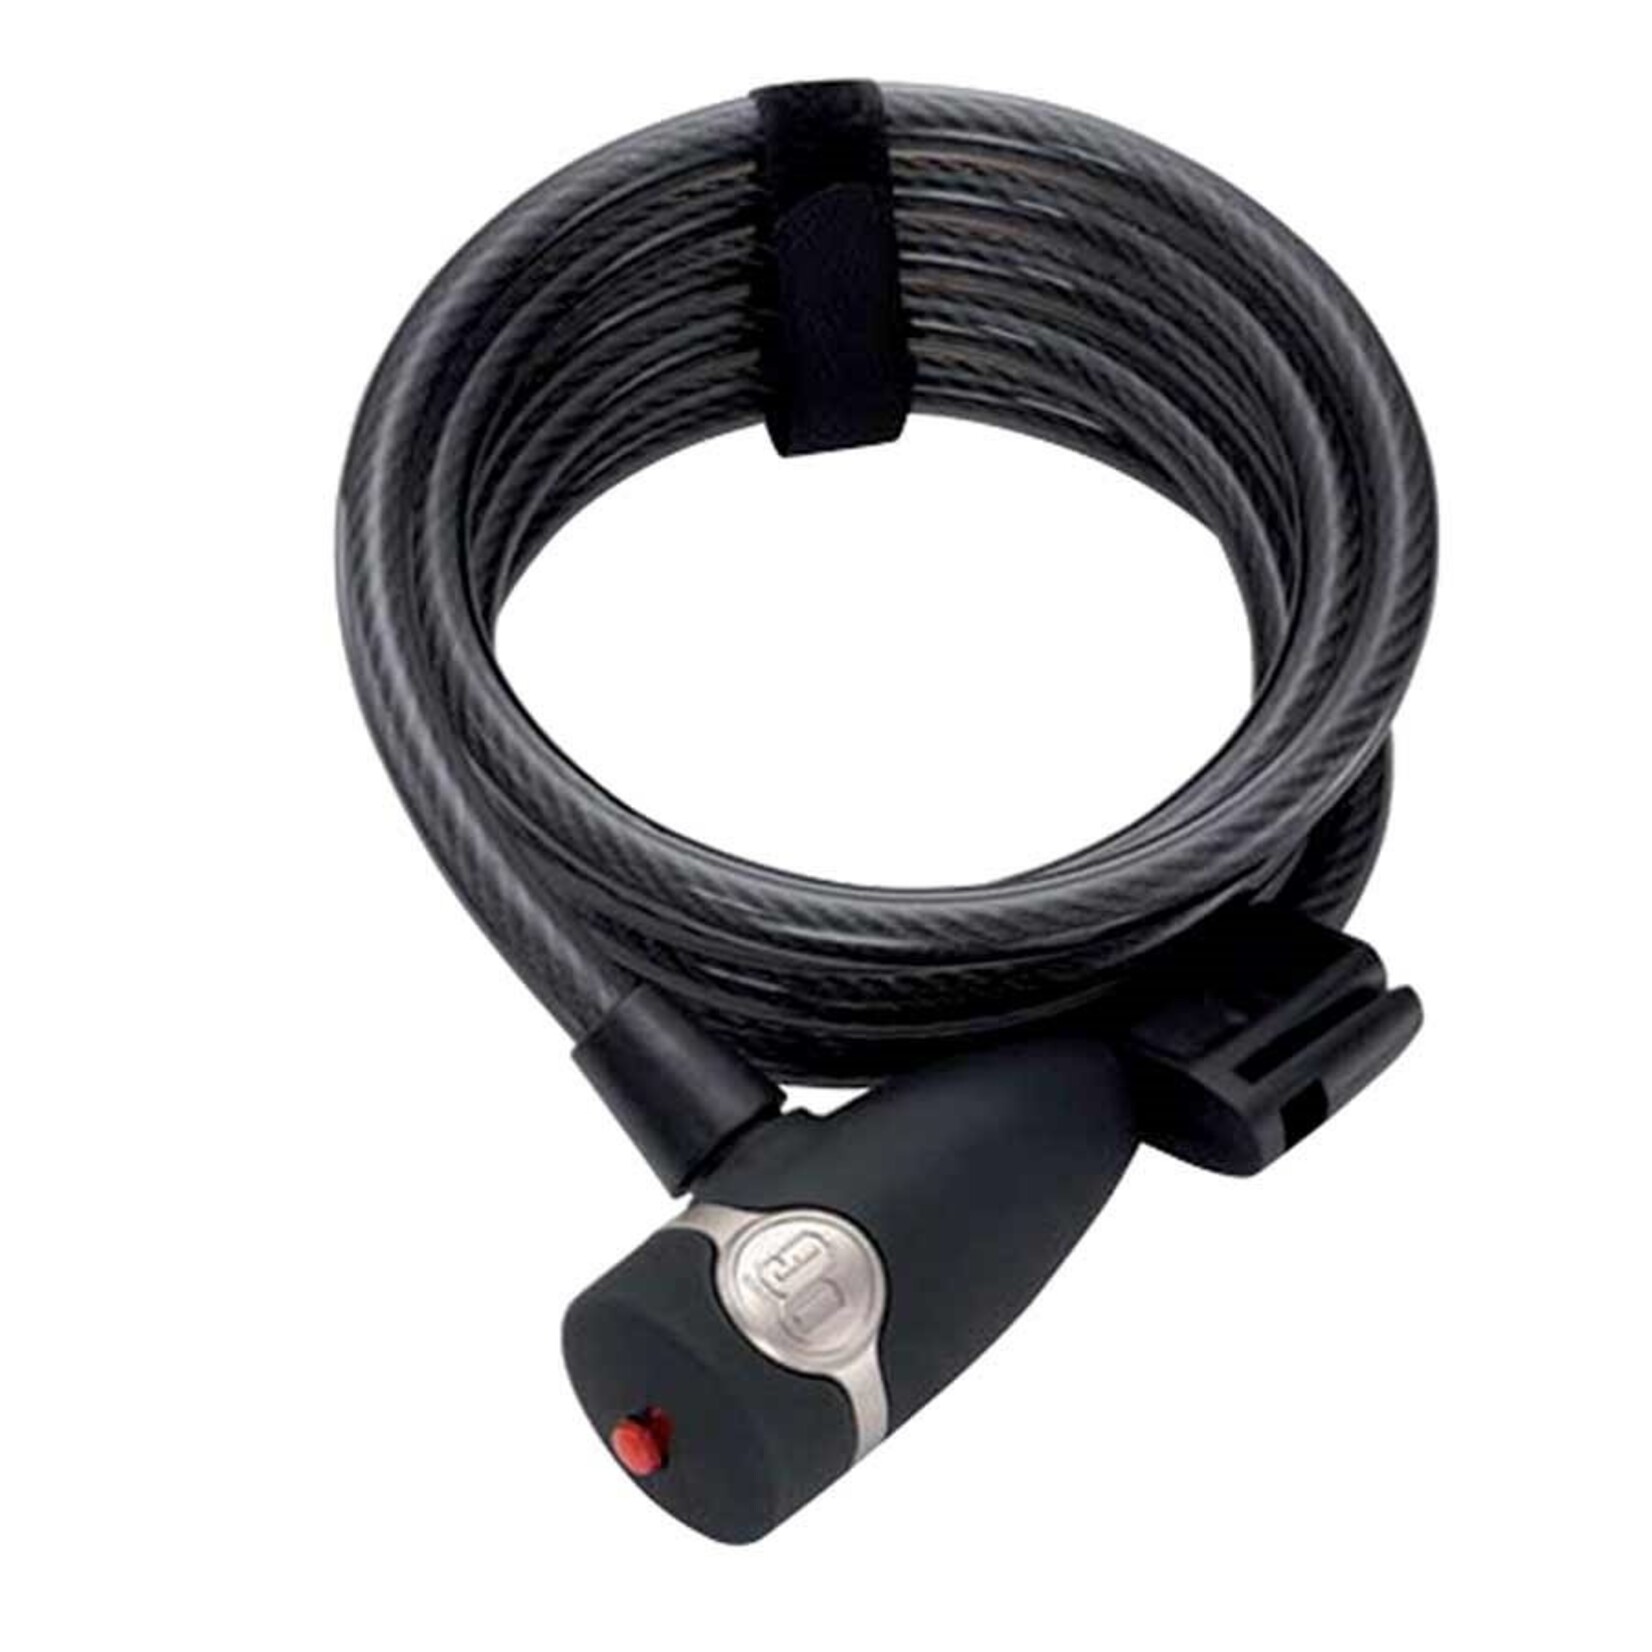 Onguard OG 5502 Coil cable